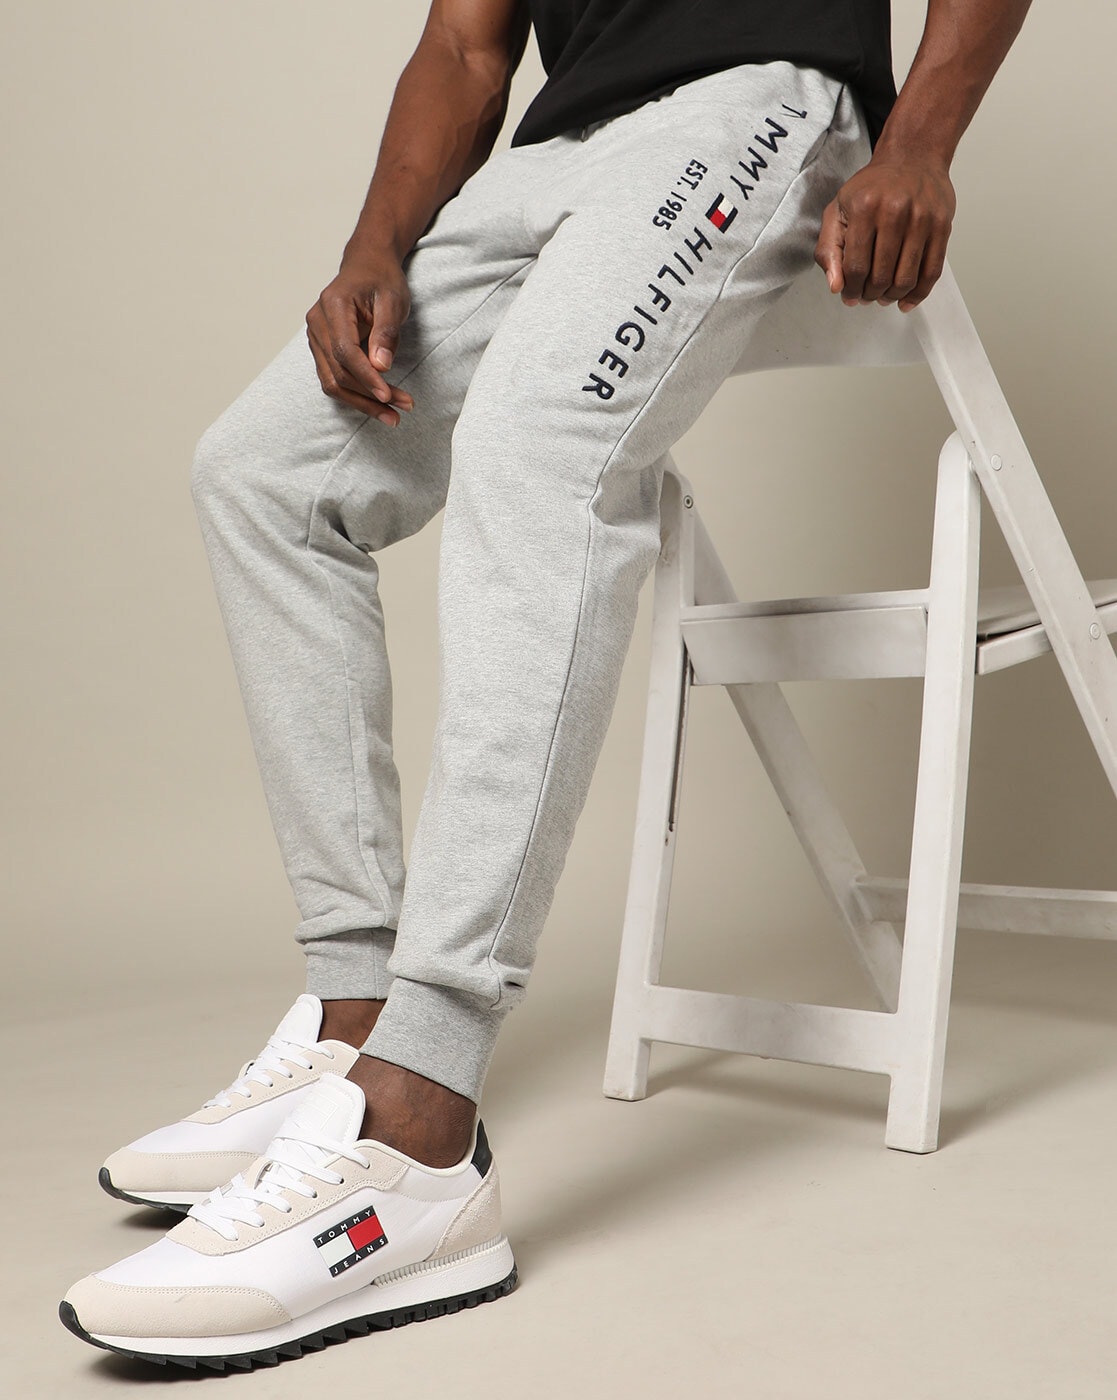 Buy Grey Heather Men Online Pants for by HILFIGER Track TOMMY